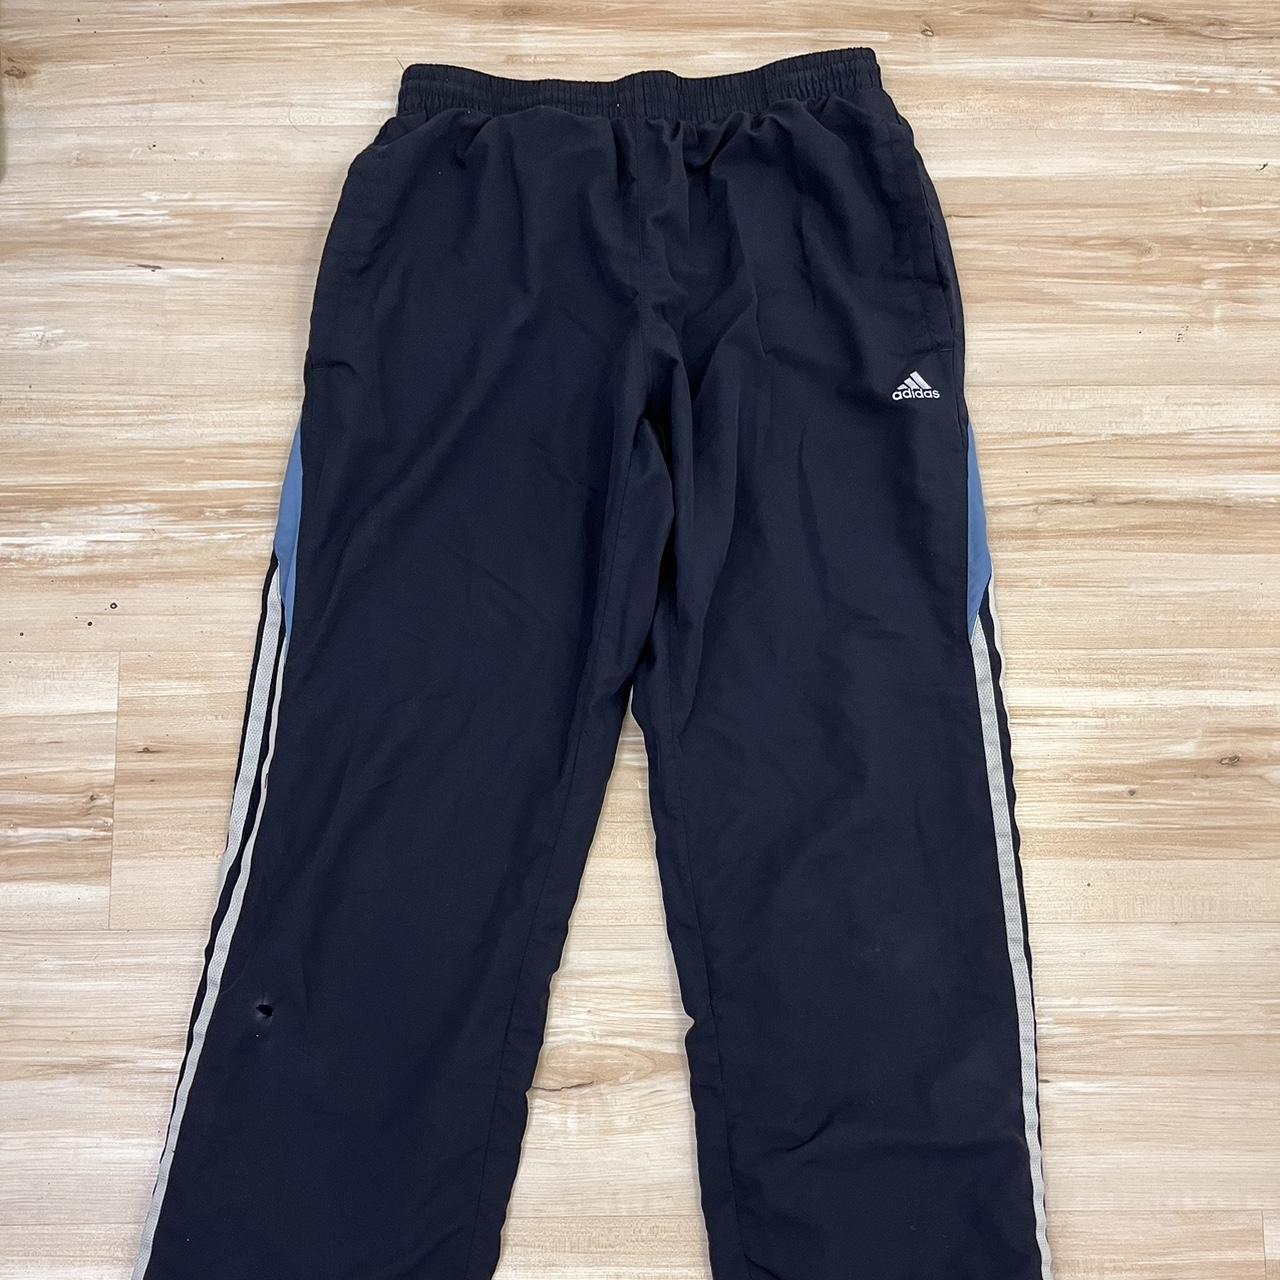 ADIDAS Navy Joggers/Sweatpants 💙 Great for... - Depop